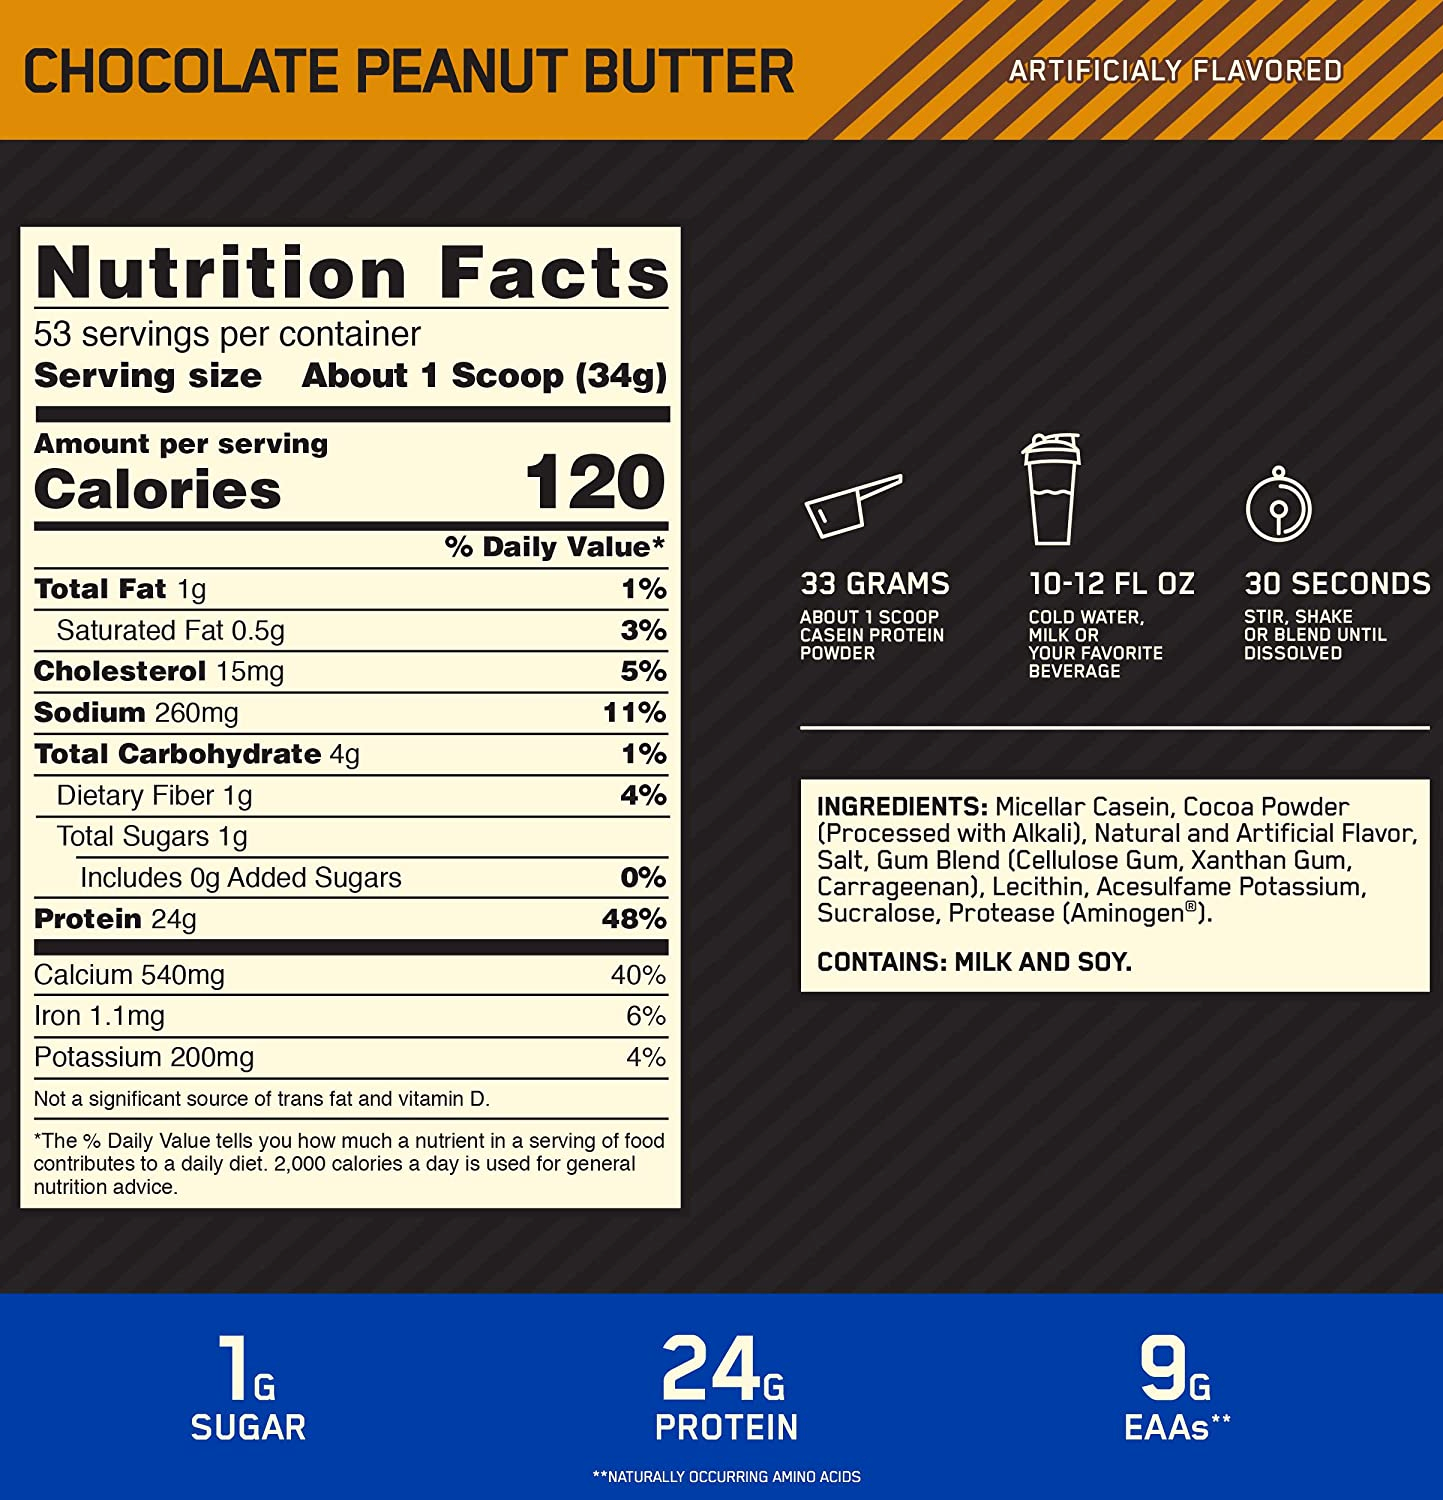 Nutrition label for Chocolate Peanut Butter flavor Casein Protein Powder. Contains 24g protein, 1g fat, 4g carbs, and 120 calories per 34g serving.